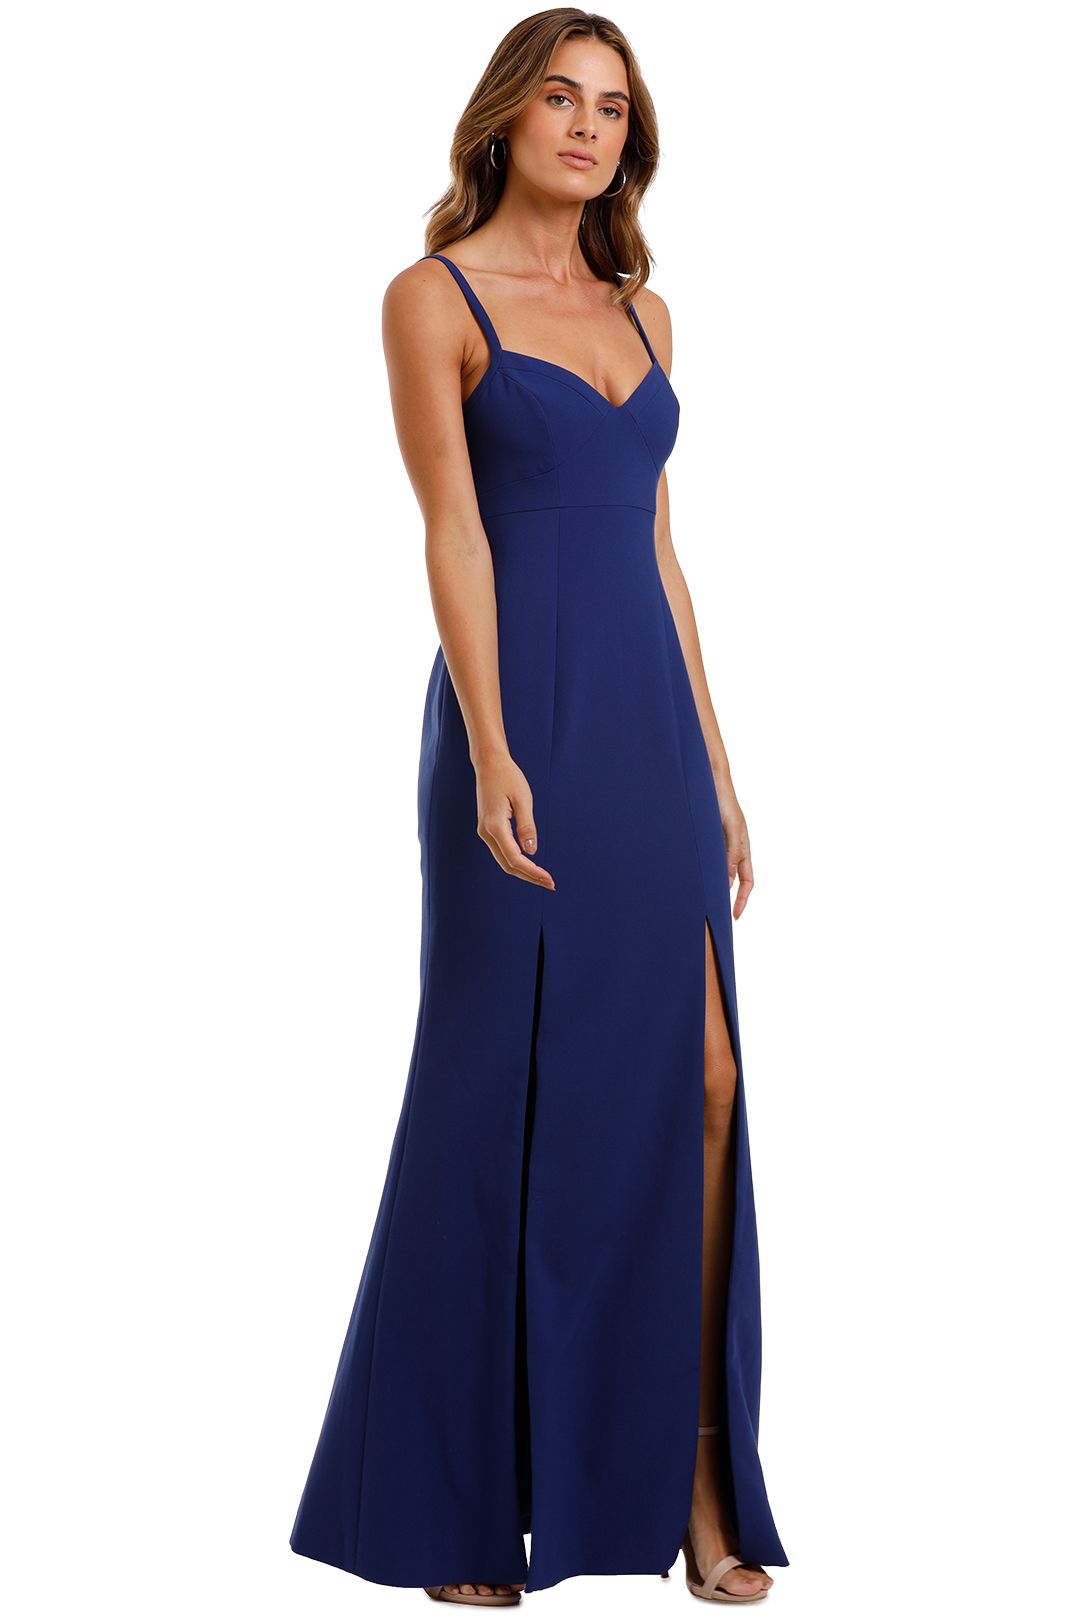 Likely NYC Alameda Gown Blueprint Maxi